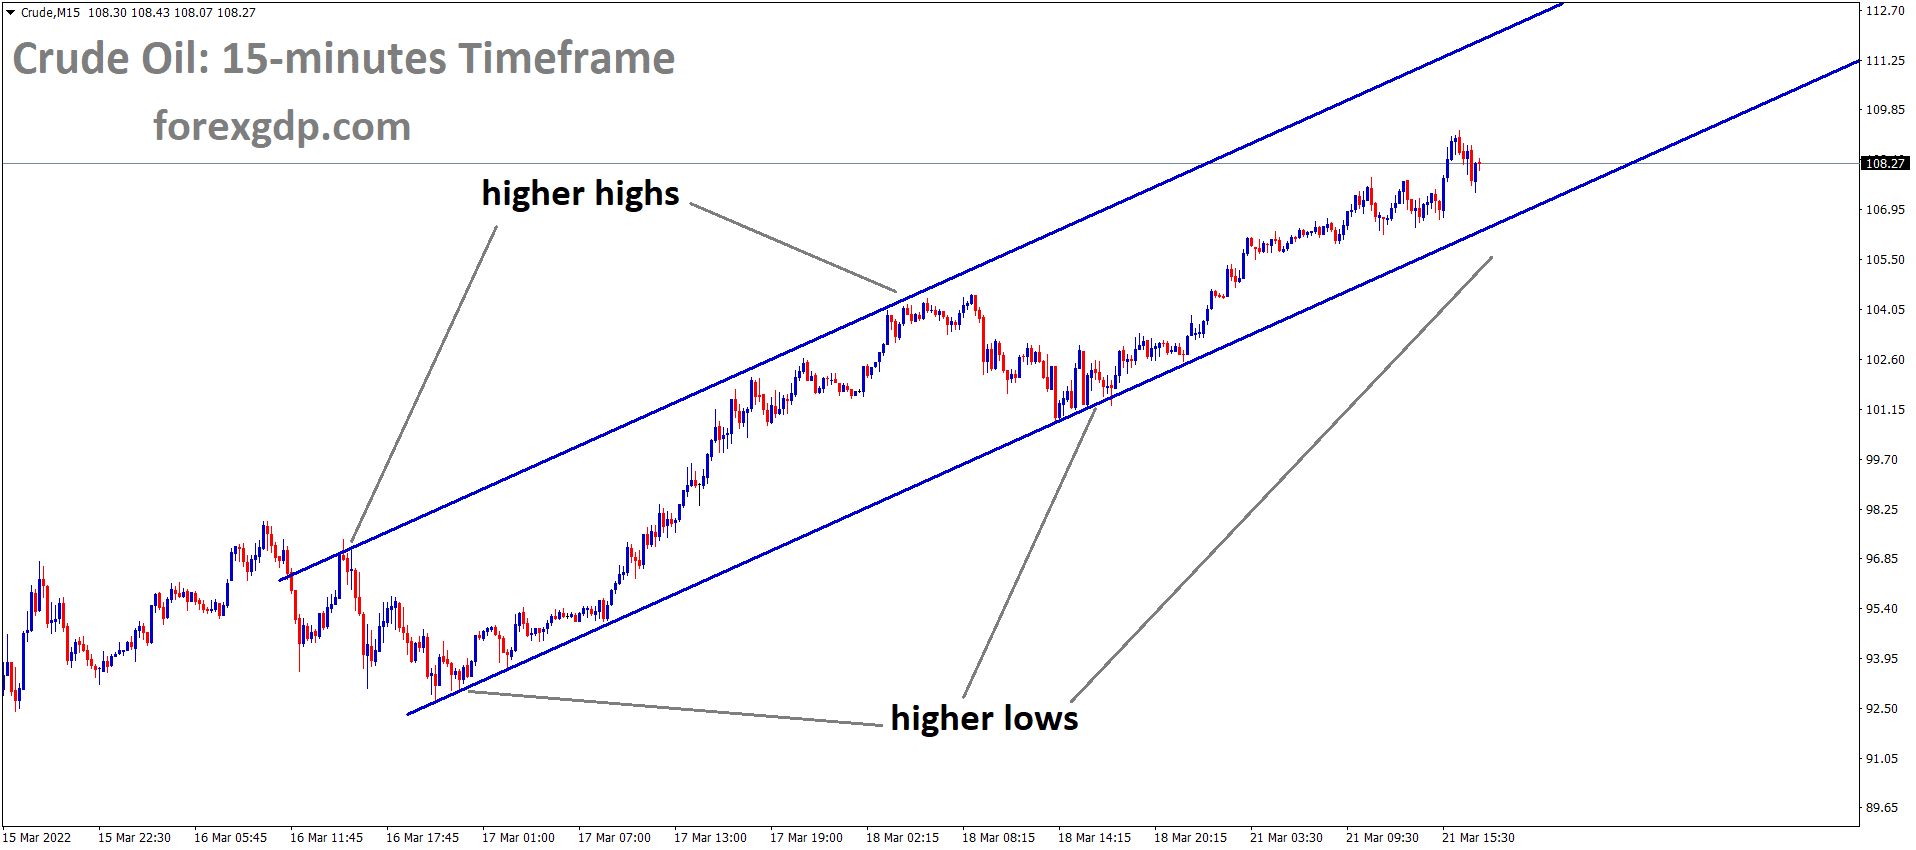 Crude M15 Market is moving in an Ascending channel and the market has reached the higher low area of the Channel